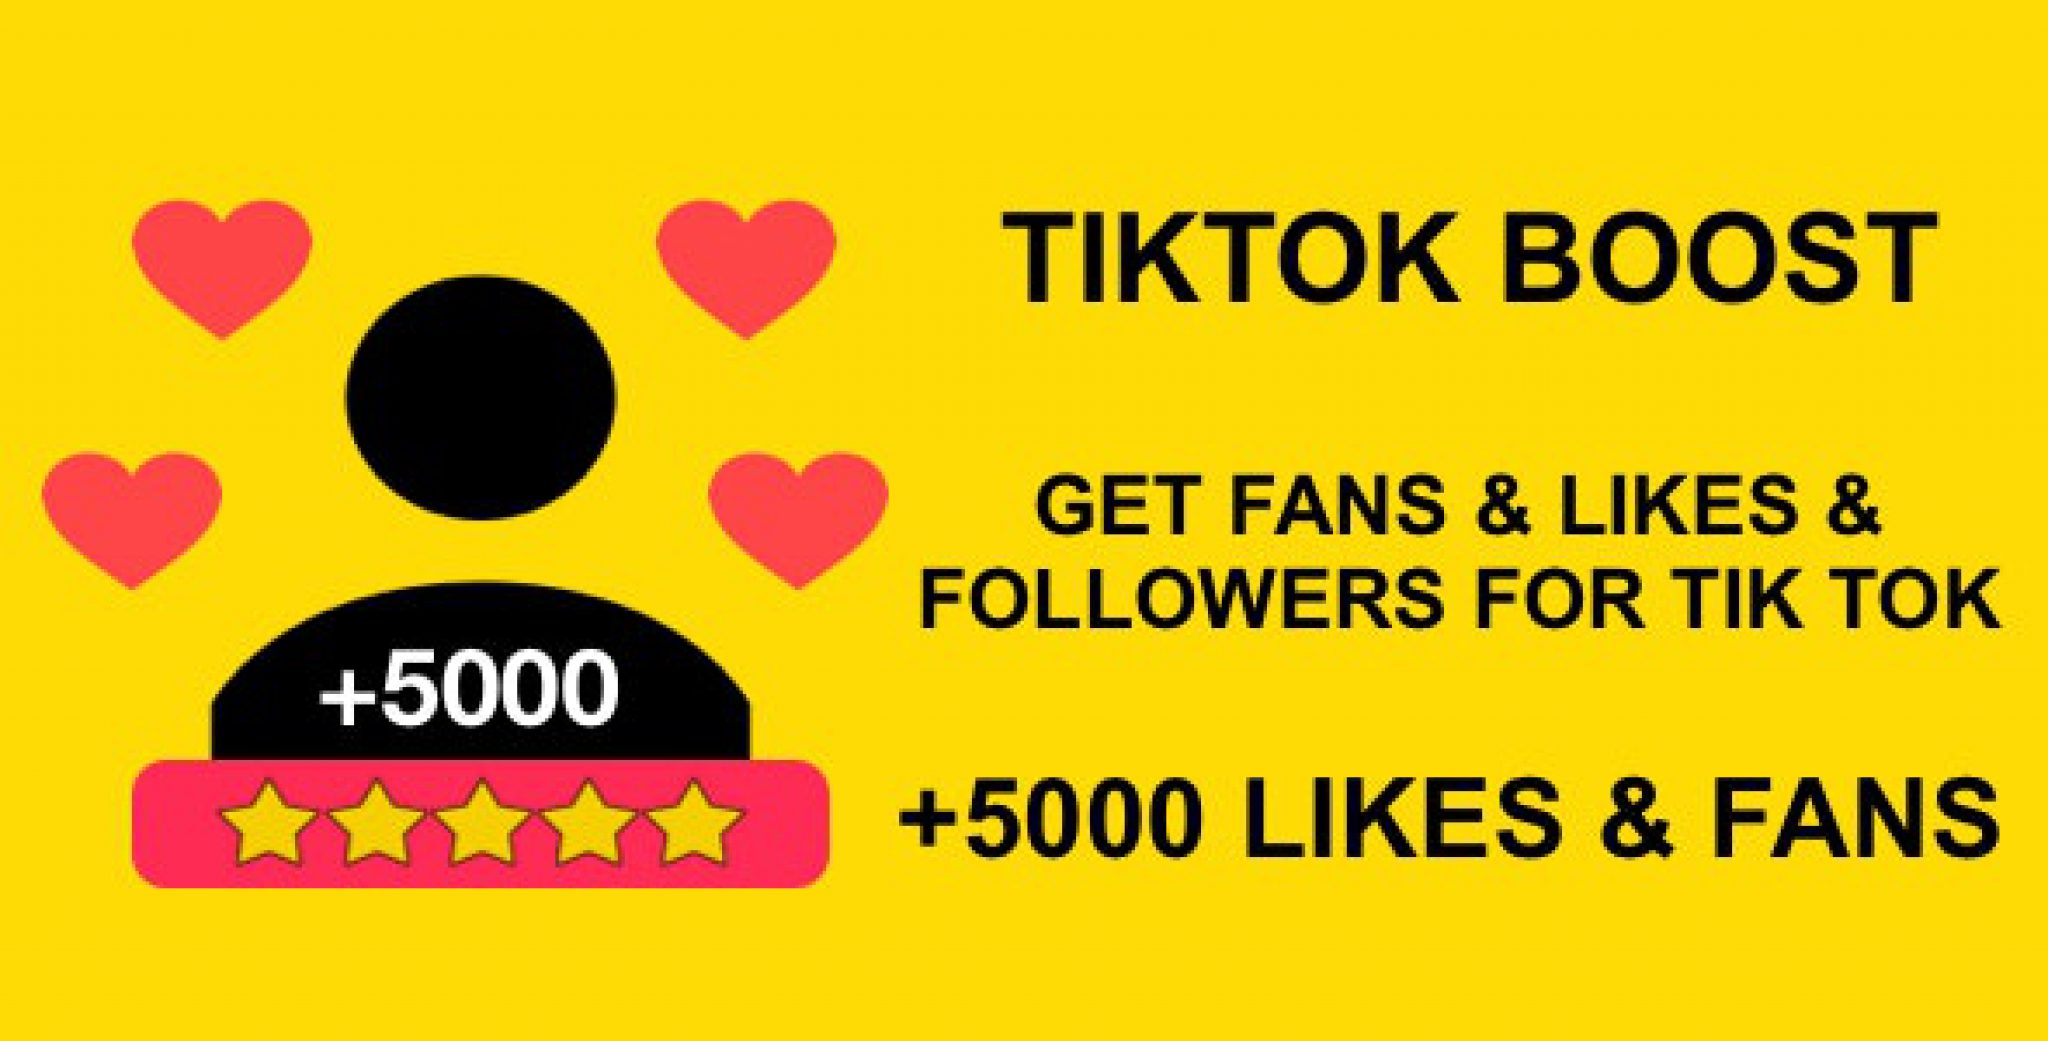 get free tiktok followers without downloading apps or survey